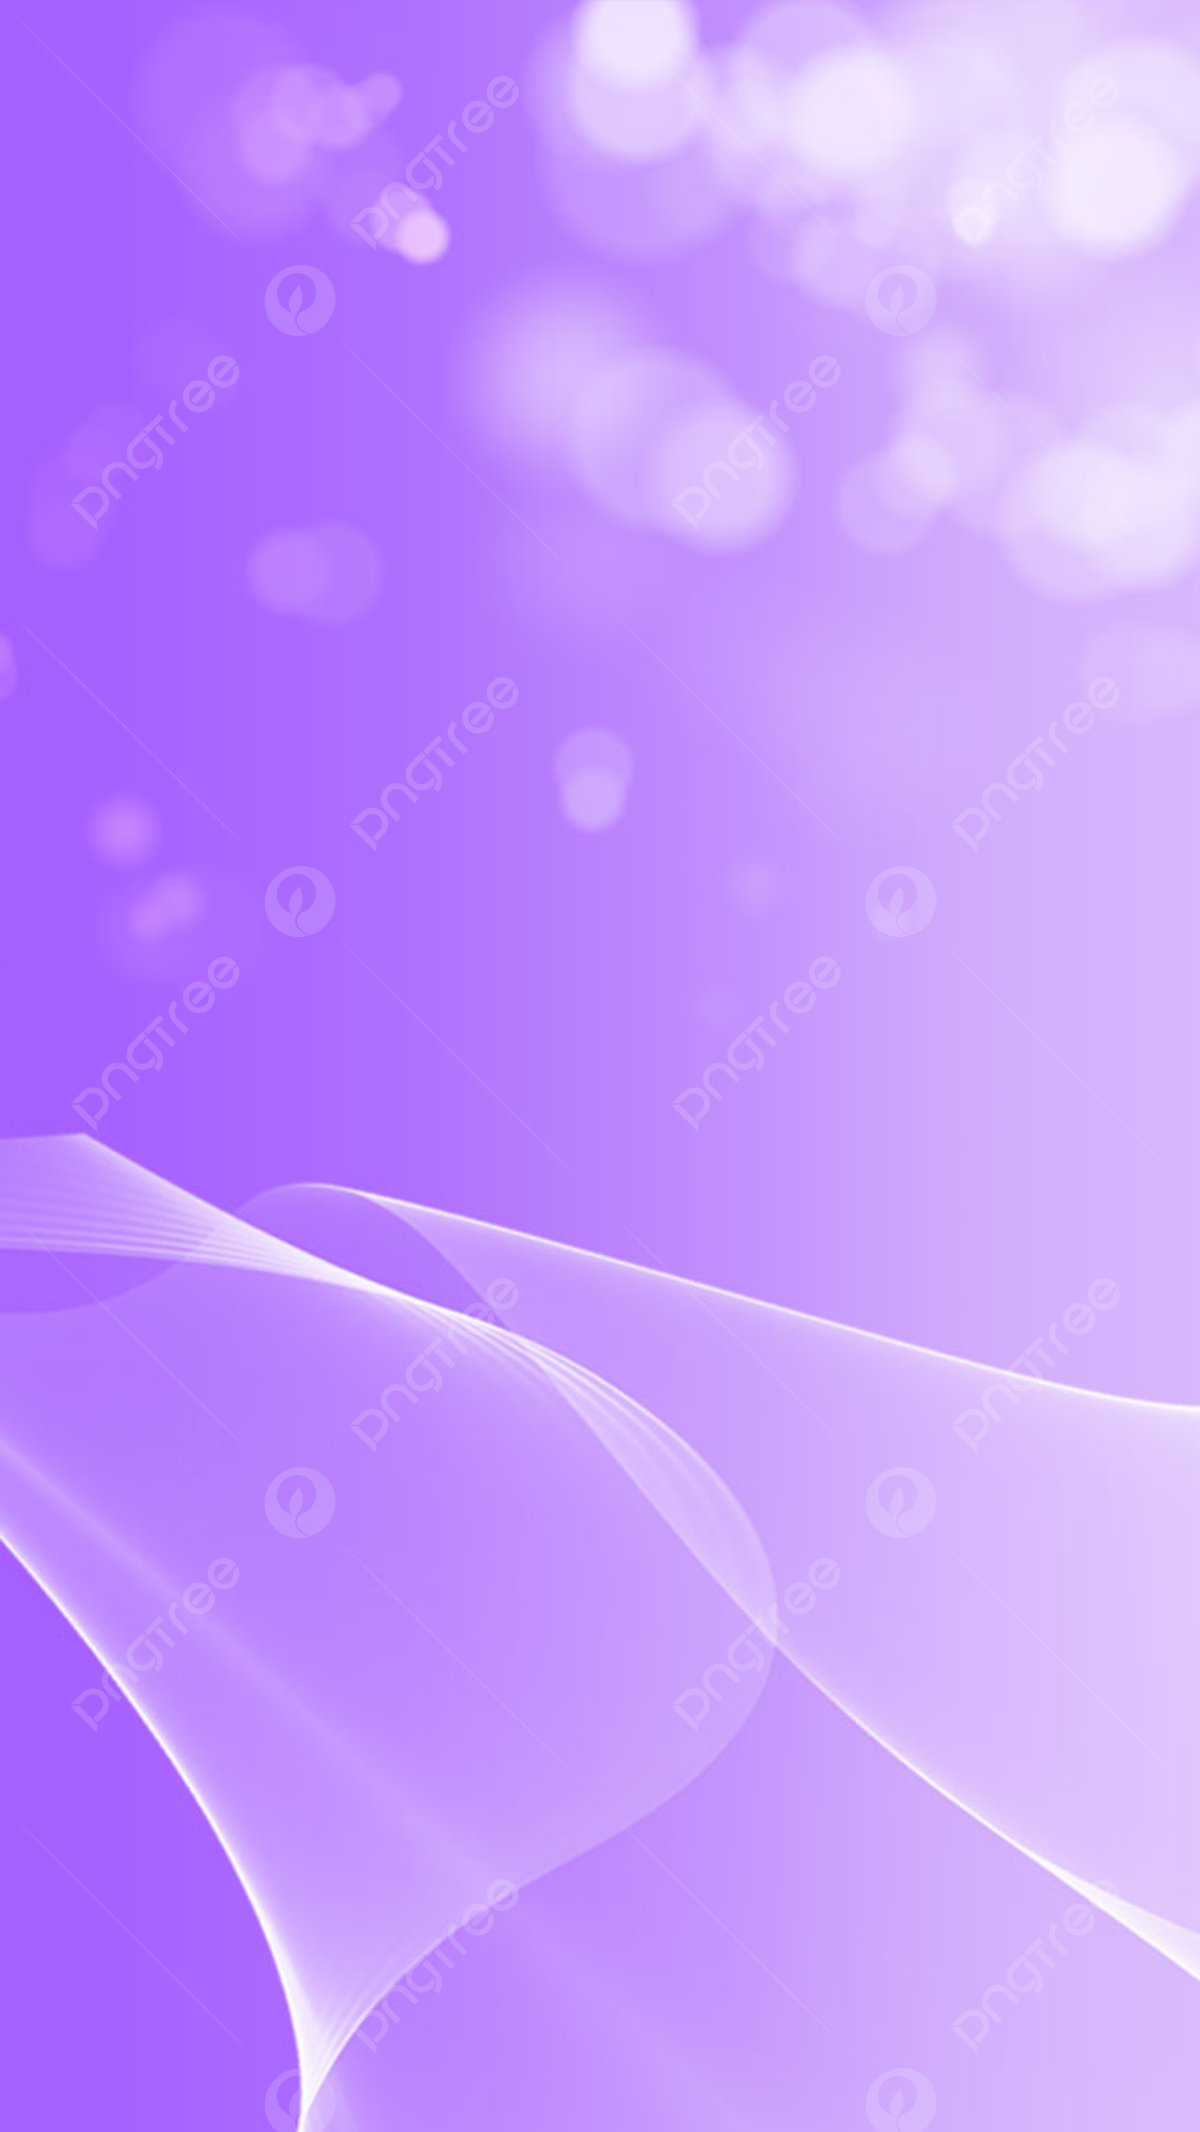 Pastel Tone Purple Pink Blue Gradient Defocused Abstract Photo Smooth Lines  Pantone Color Background Stock Photo - Image of blue, glow: 196474162